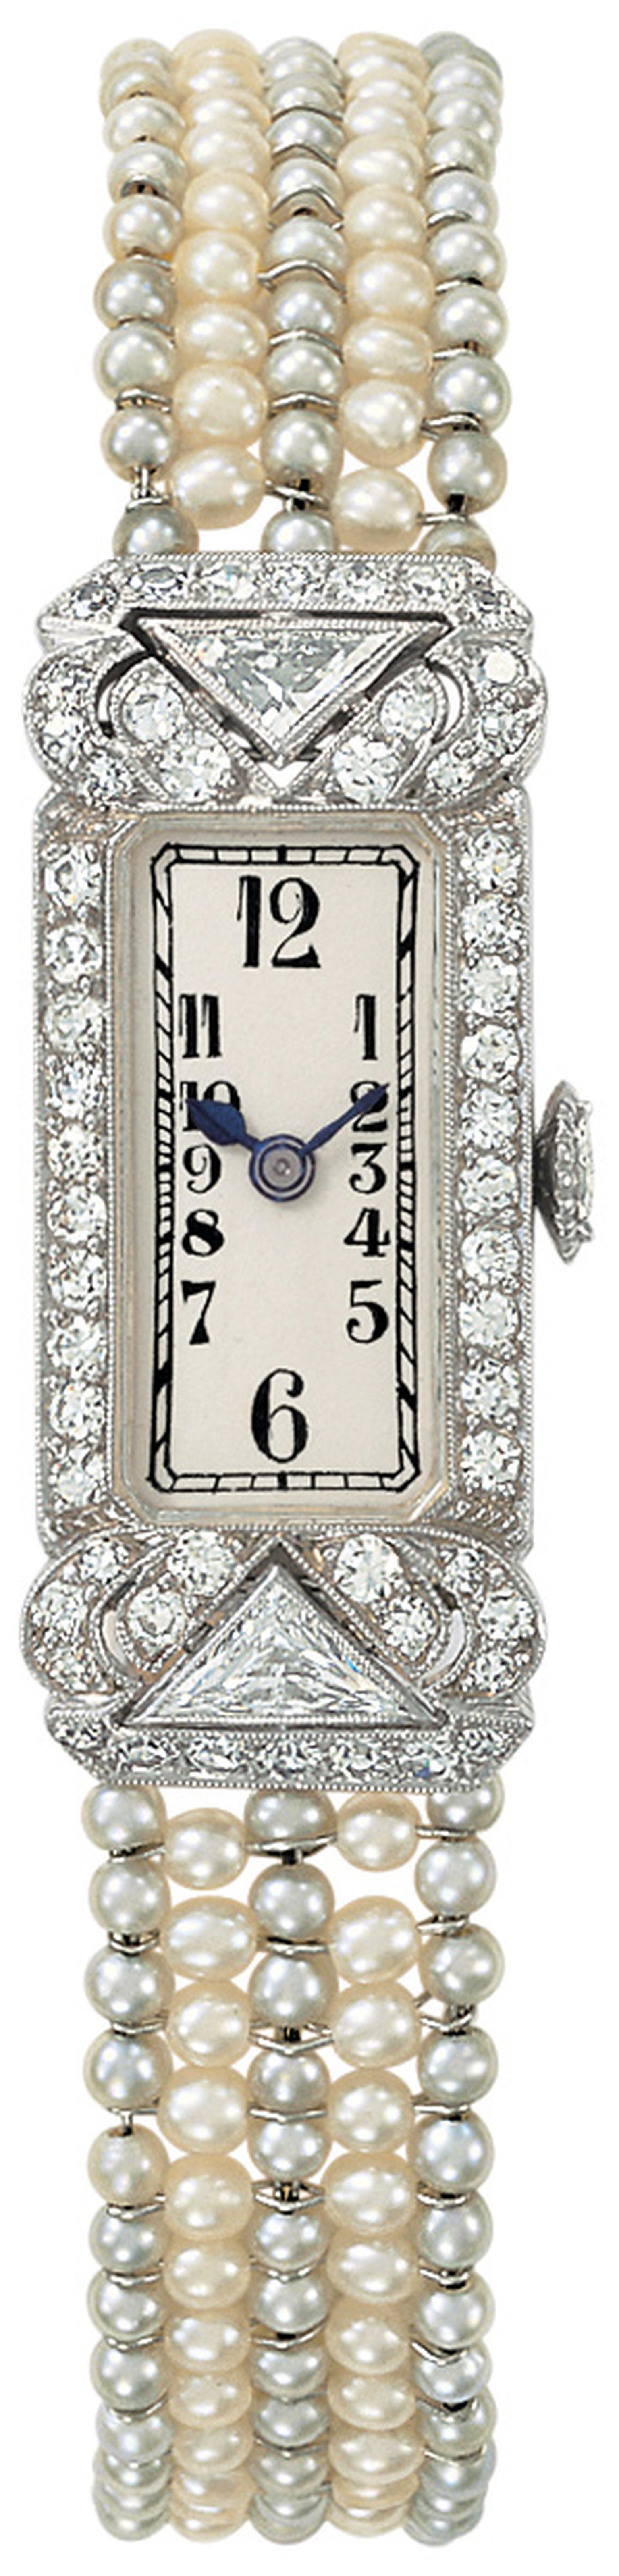 Patek-Philippe-P0641_a_100_collection_1925-40.jpg